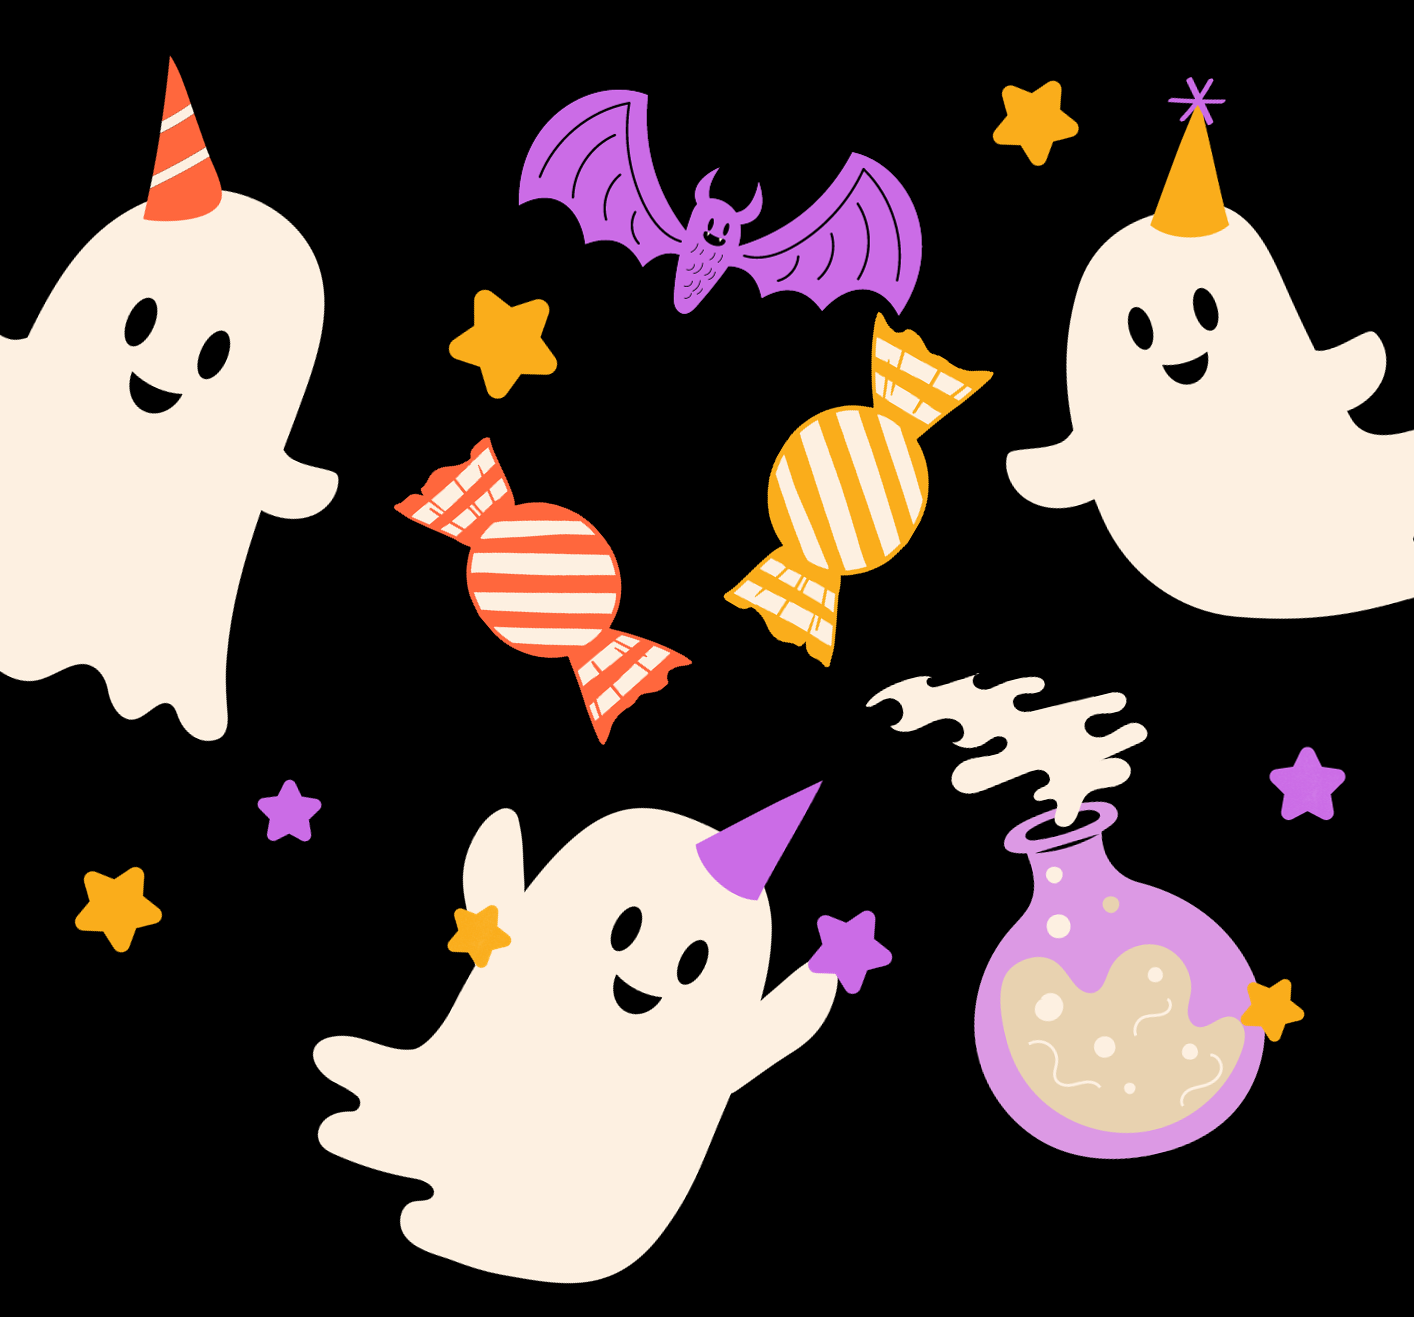 Cartoon ghosts with party hats float amid a bat, a cauldron, and wrapped candies against a black background